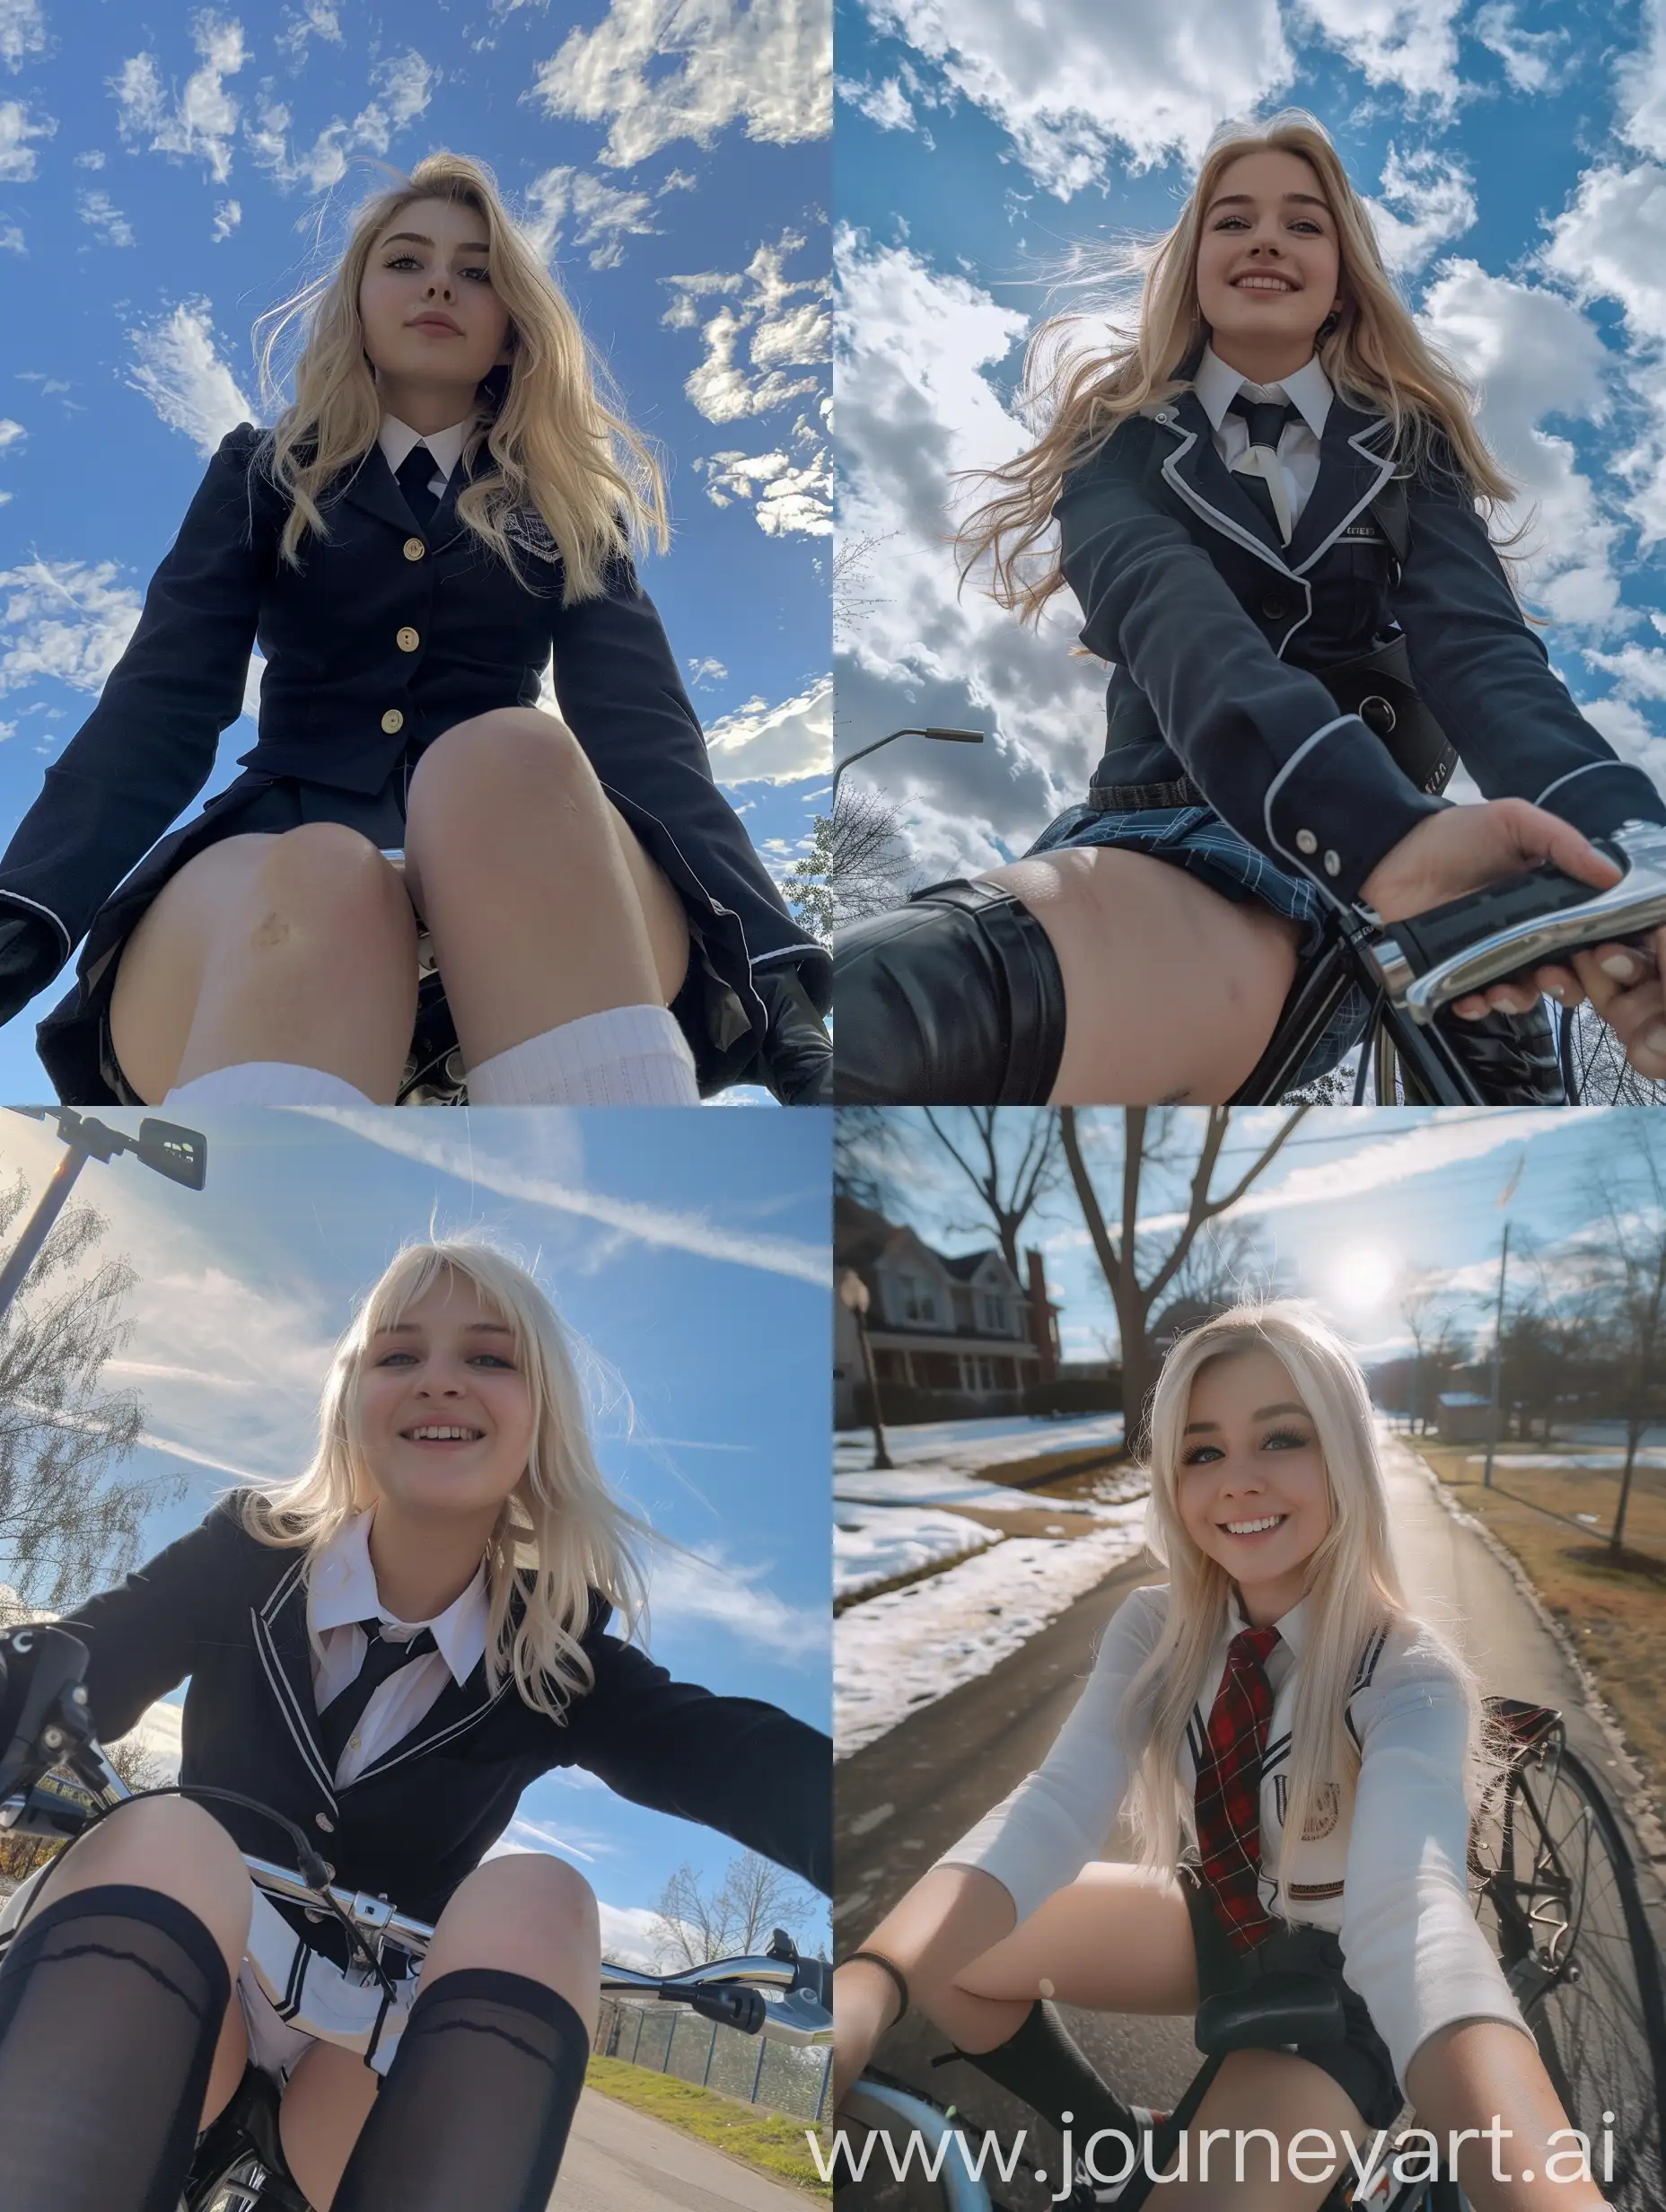 Young-Woman-in-School-Uniform-Riding-Bicycle-Selfie